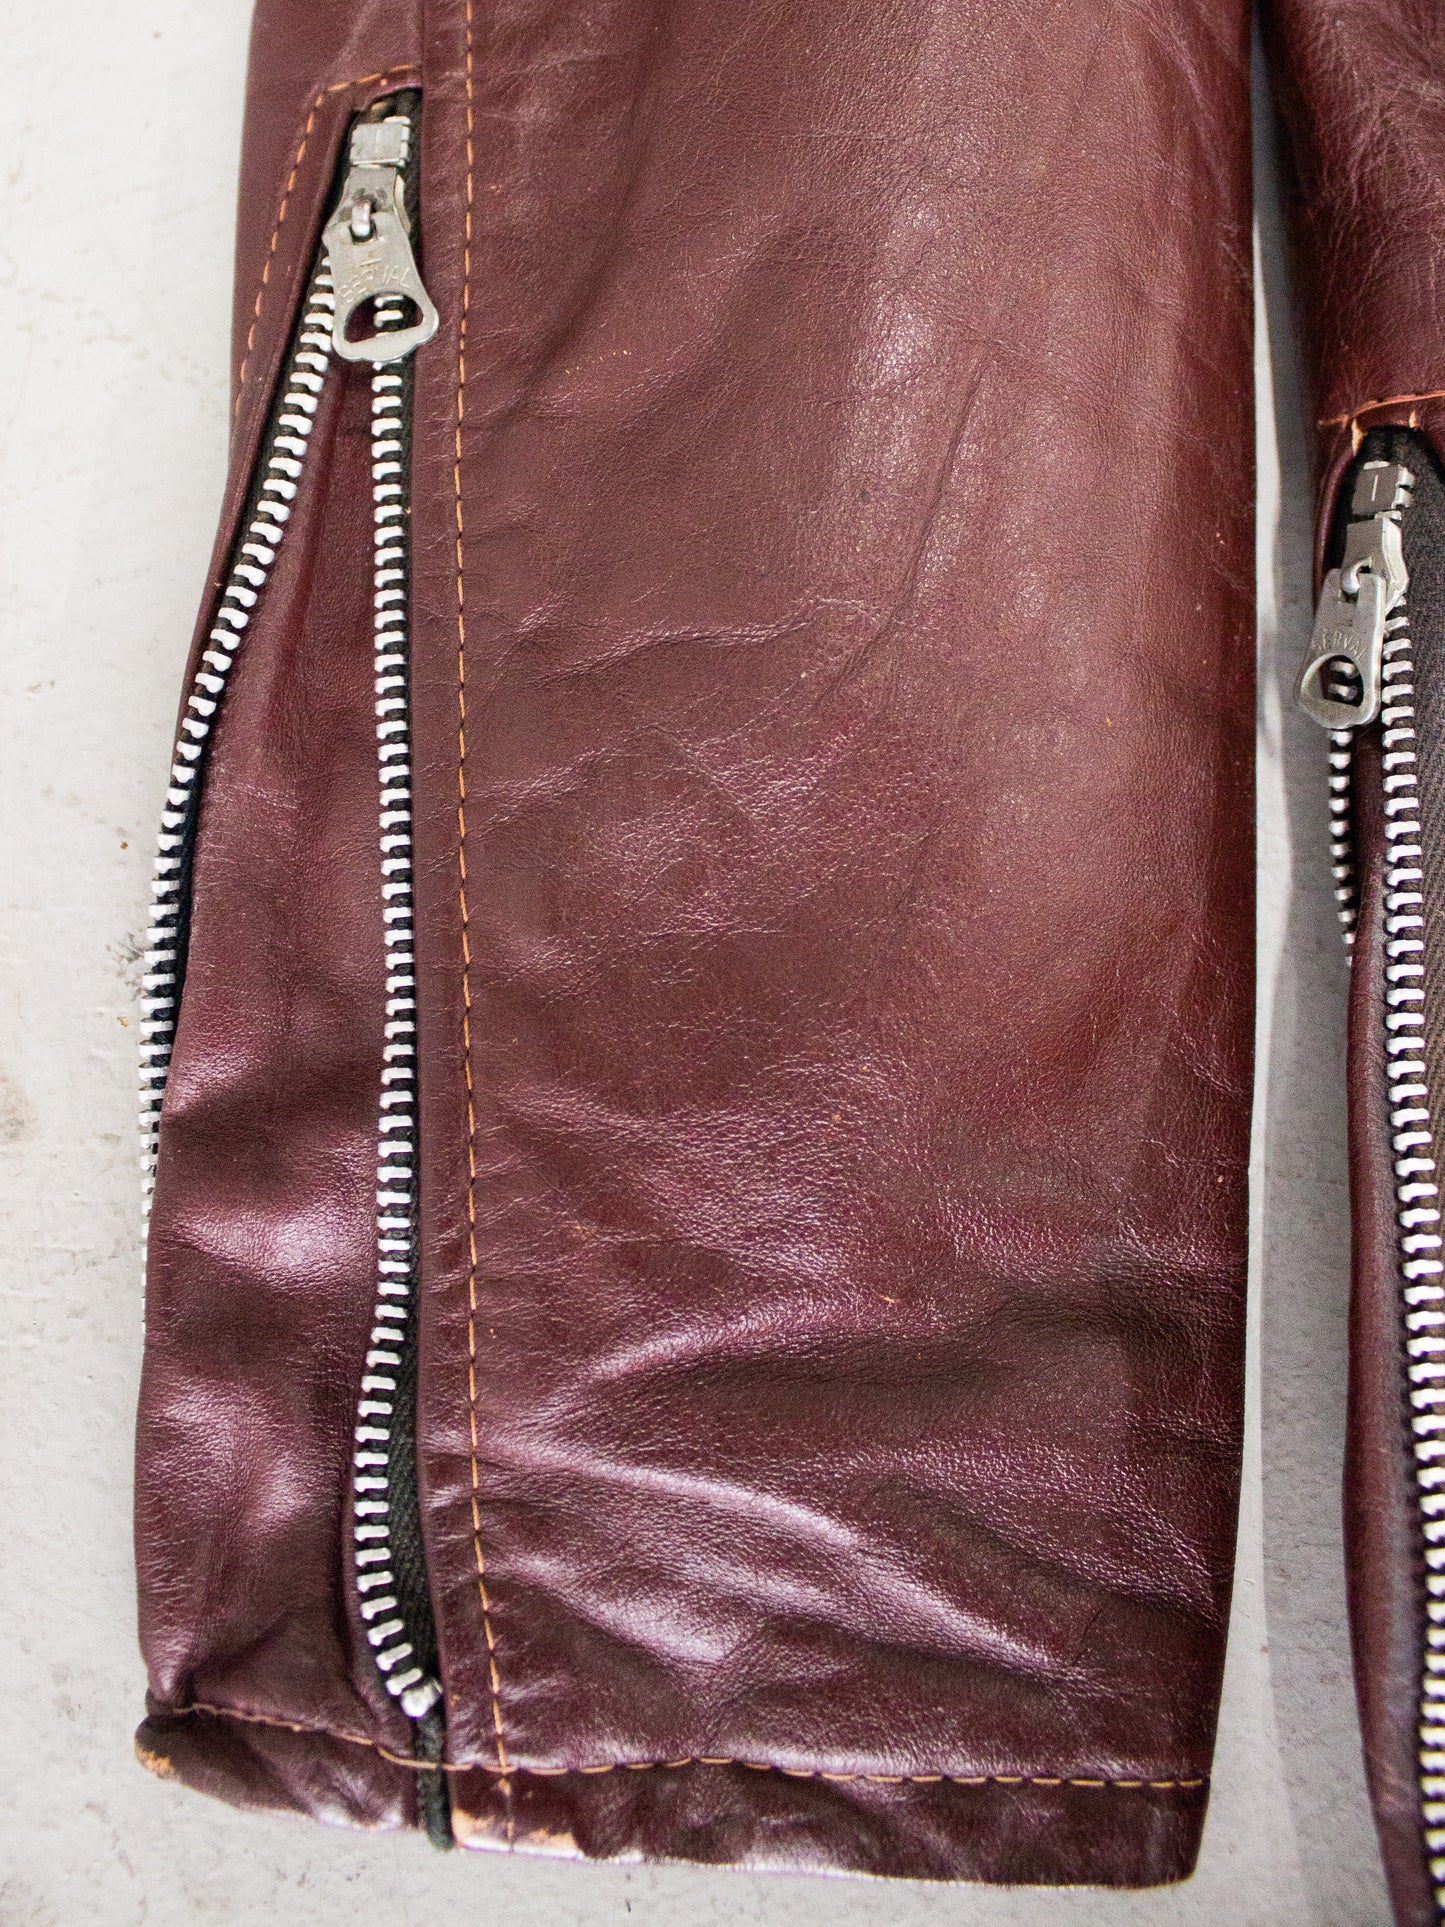 1960's Beau Breed Oxblood Brown Leather Cafe Racer Motorcycle Jacket Made in USA (Small-Medium)